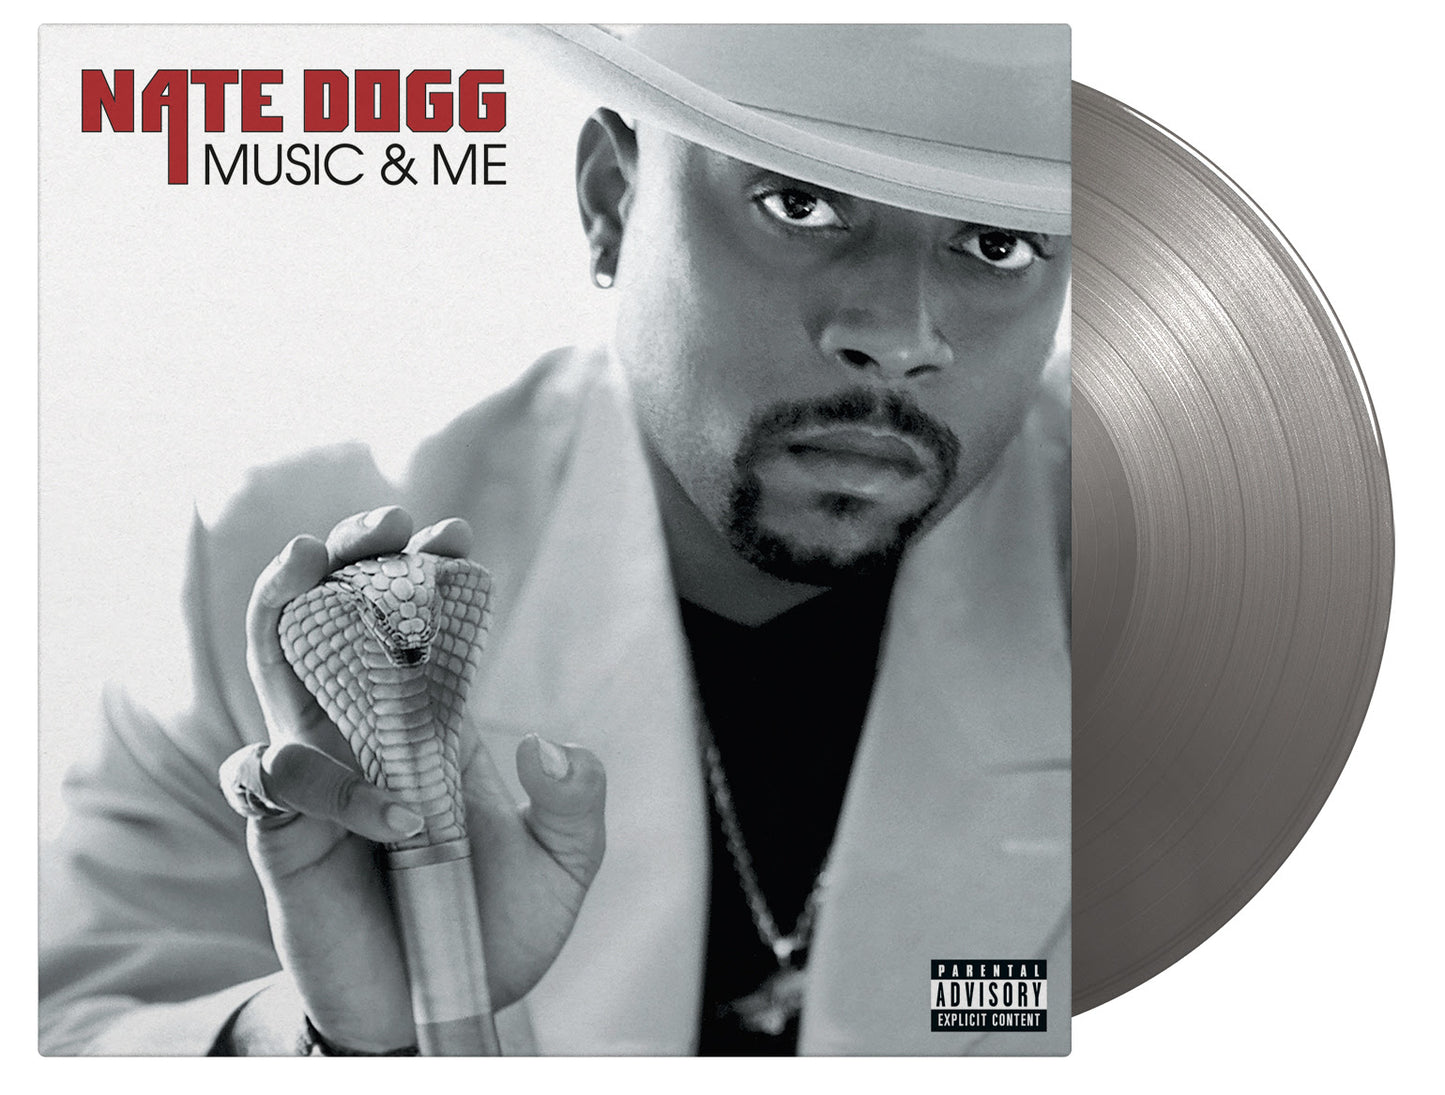 Nate Dogg - Music and Me - The Vault Collective ltd